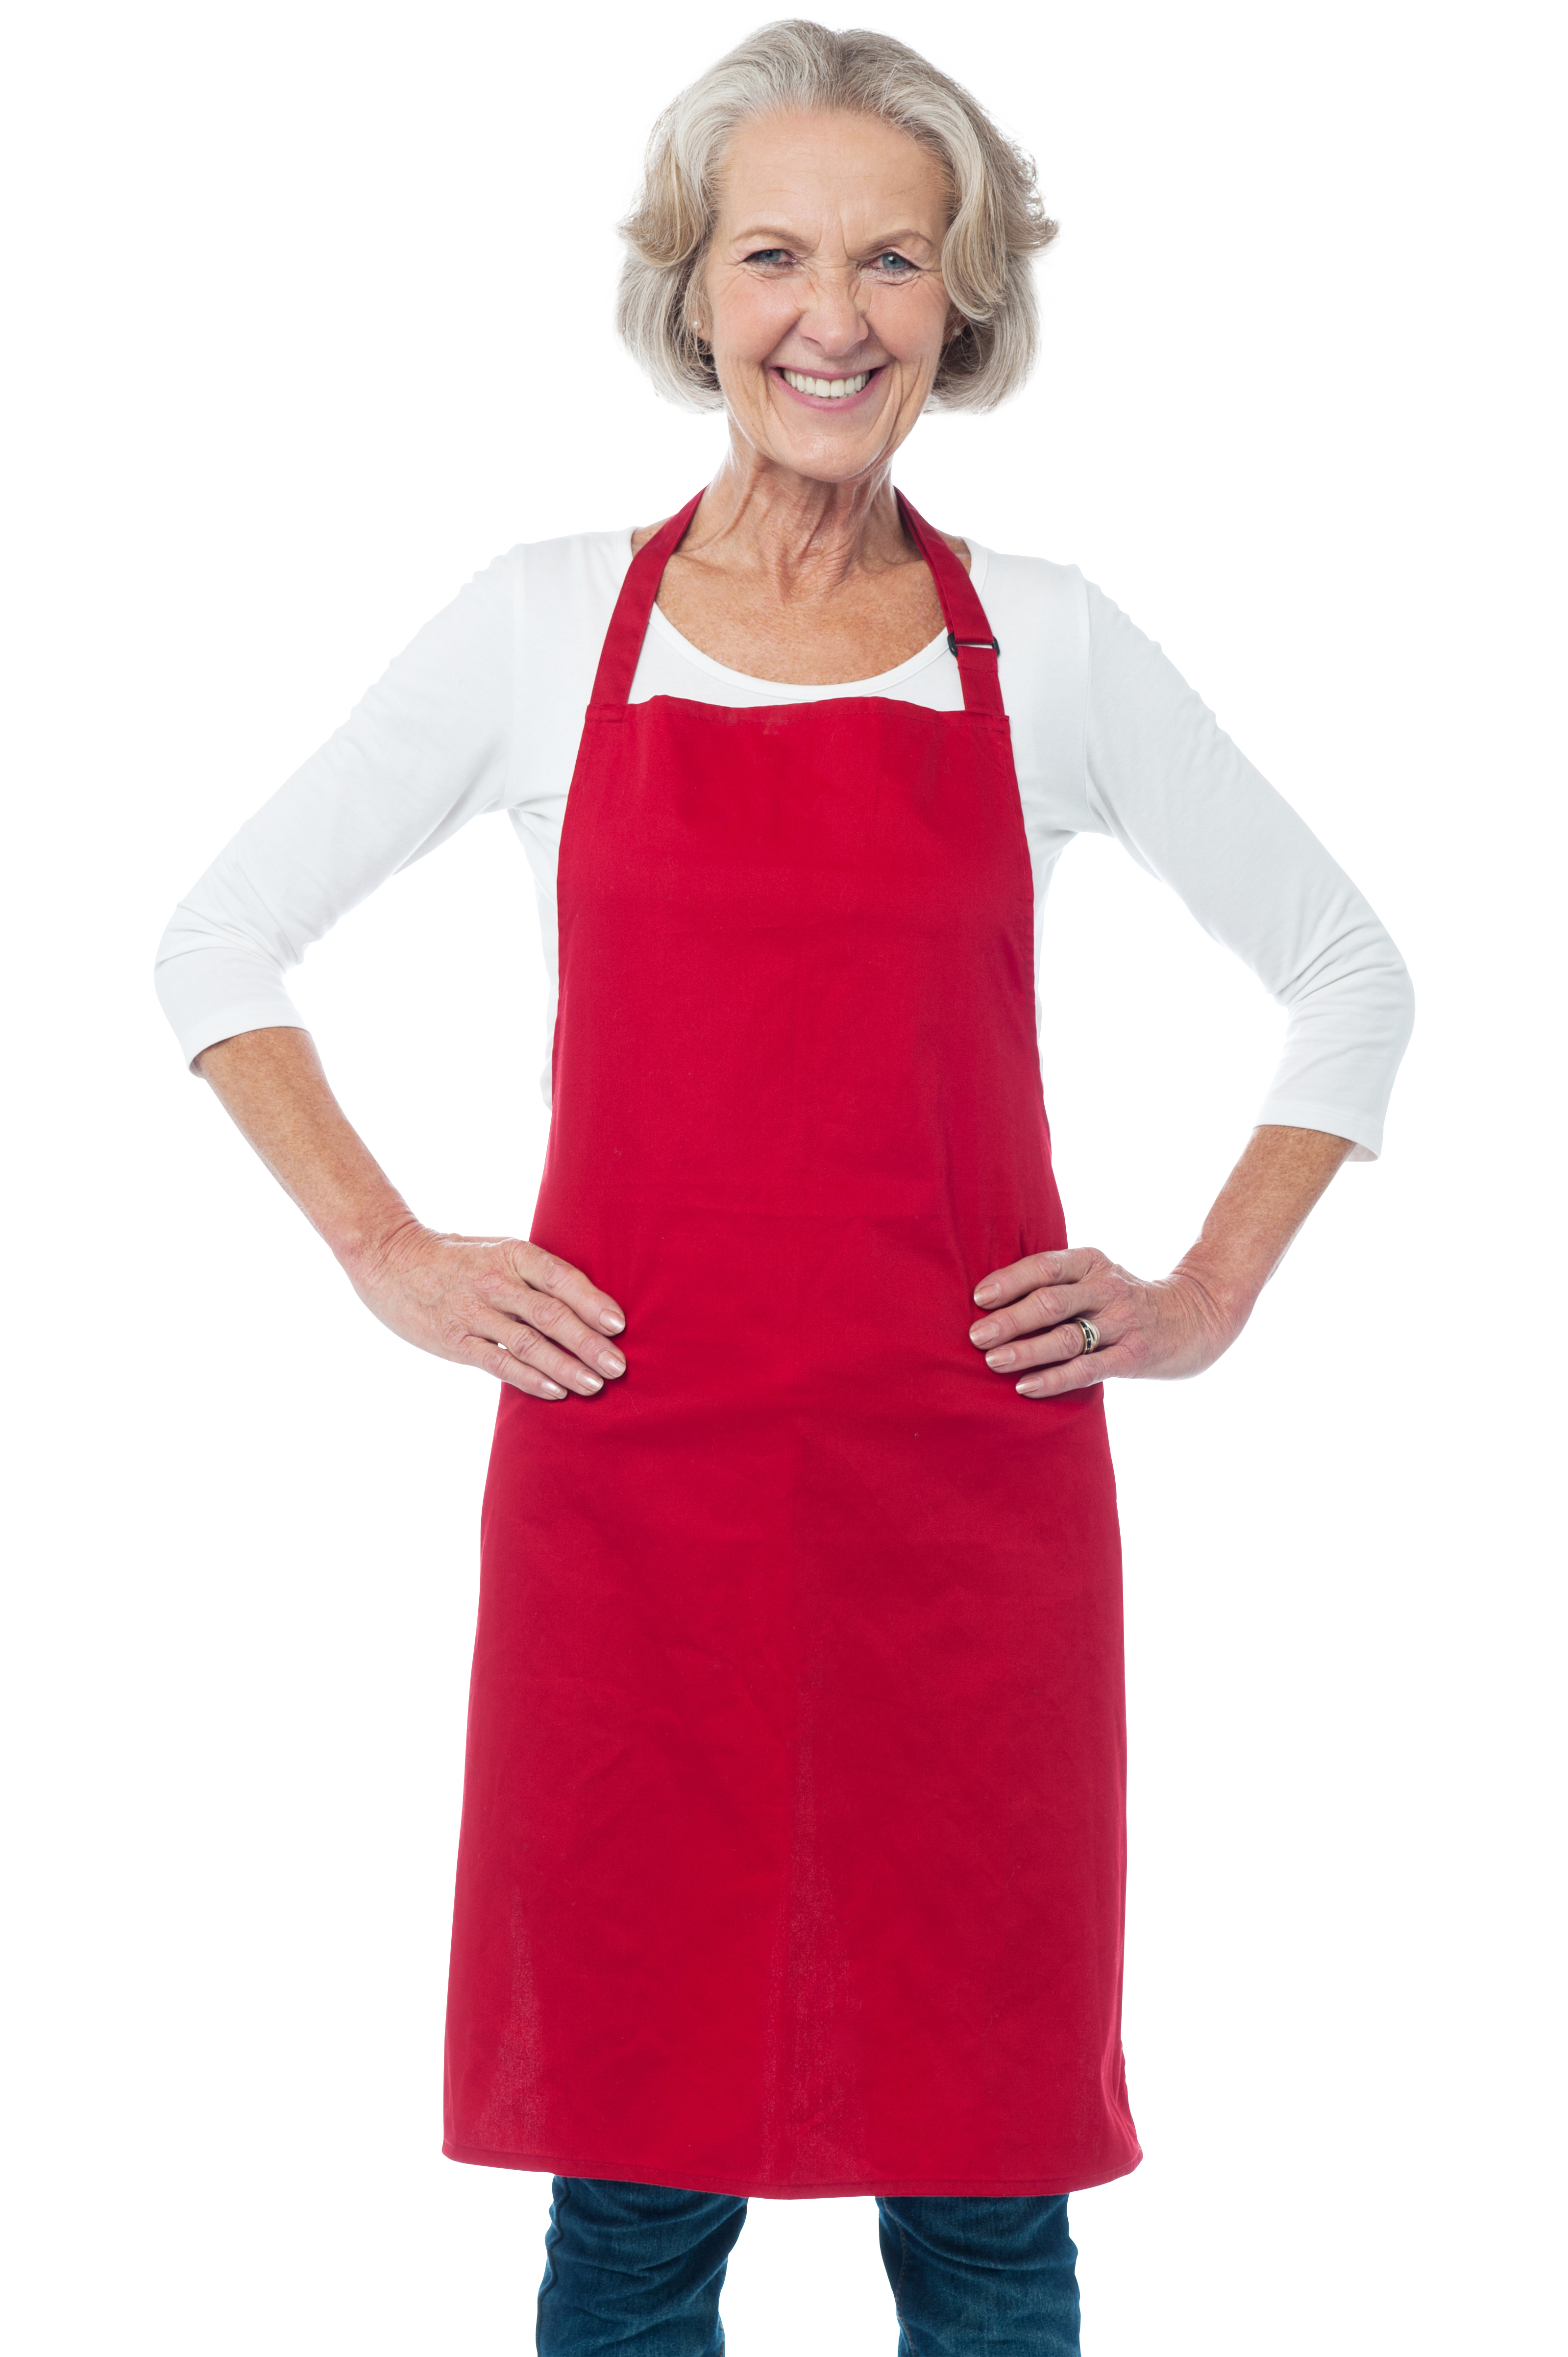 Old Woman Free Commercial Use